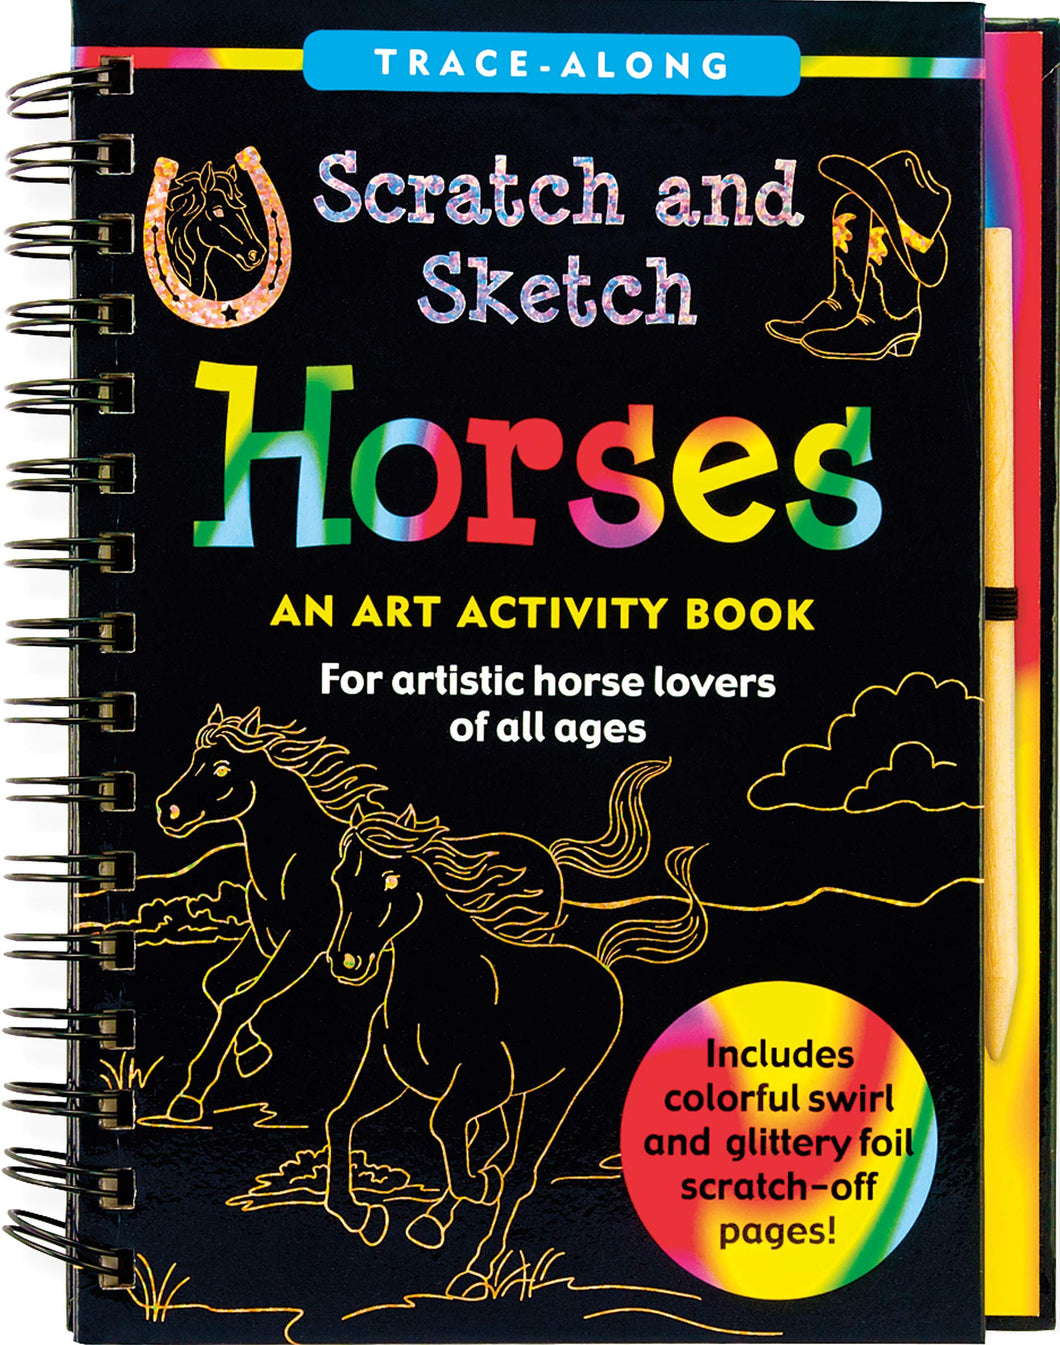 Scratch & Sketch Horses (Trace-Along) Hardcover